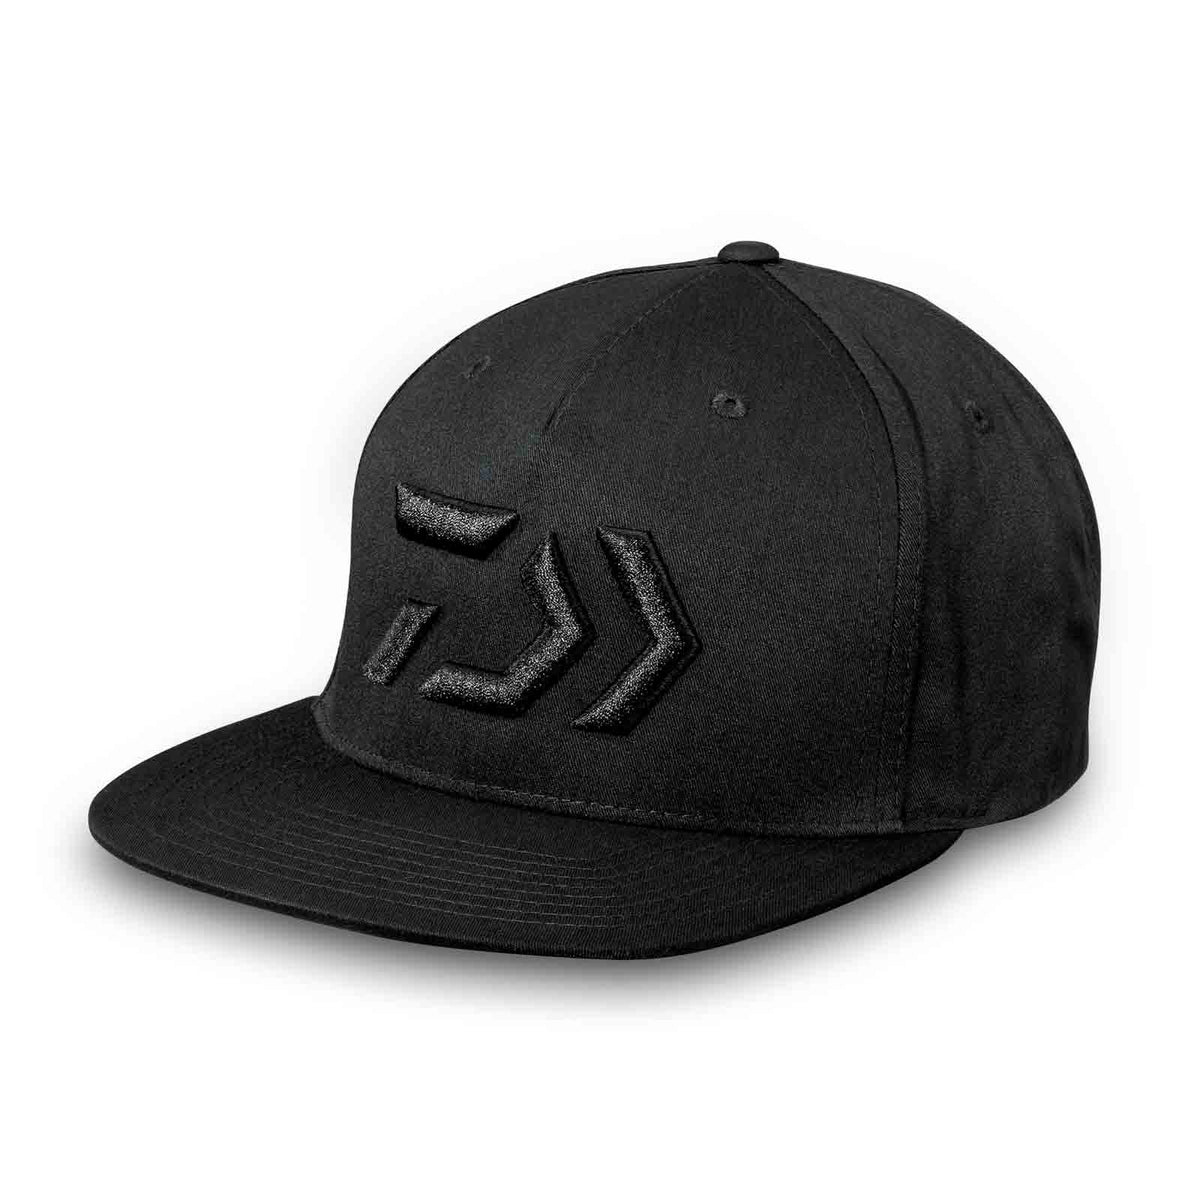 Daiwa D-VEC PINCH BILL WITH EMBROIDERED LOGO Black Hats